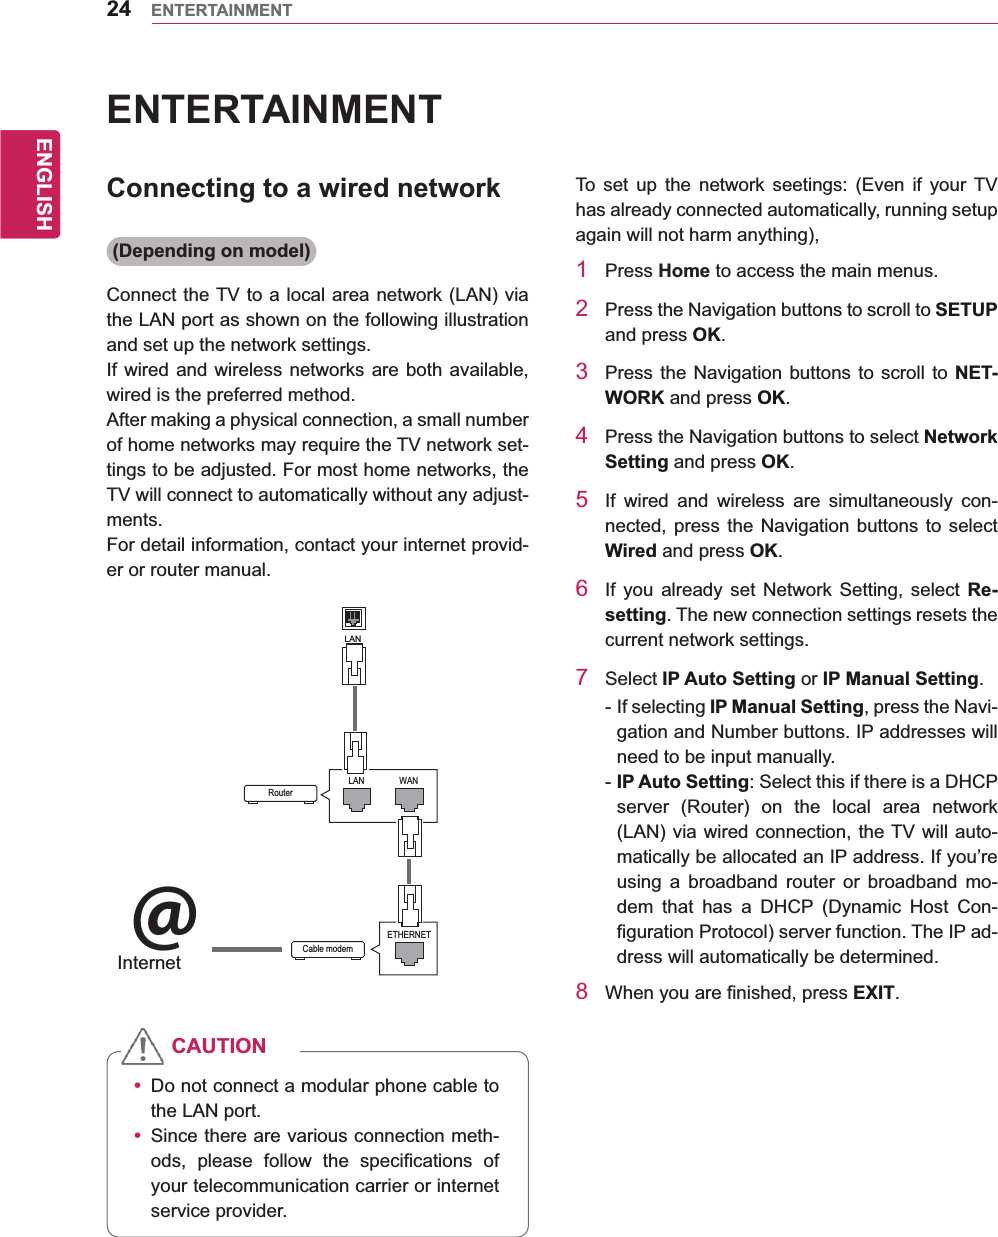 24ENGENGLISHENTERTAINMENTENTERTAINMENTConnecting to a wired network(Depending on model)Connect the TV to a local area network (LAN) via the LAN port as shown on the following illustration and set up the network settings.If wired and wireless networks are both available, wired is the preferred method.After making a physical connection, a small number of home networks may require the TV network set-tings to be adjusted. For most home networks, the TV will connect to automatically without any adjust-ments.For detail information, contact your internet provid-er or router manual.y Do not connect a modular phone cable to the LAN port.y Since there are various connection meth-ods, please follow the specifications of your telecommunication carrier or internet service provider.CAUTIONTo set up the network seetings: (Even if your TV has already connected automatically, running setup again will not harm anything),1 Press Home to access the main menus.2  Press the Navigation buttons to scroll to SETUP and press OK.3  Press the Navigation buttons to scroll to NET-WORK and press OK.4  Press the Navigation buttons to select Network Setting and press OK.5  If wired and wireless are simultaneously con-nected, press the Navigation buttons to select Wired and press OK.6  If you already set Network Setting, select Re-setting. The new connection settings resets the current network settings. 7 Select IP Auto Setting or IP Manual Setting.- If selecting IP Manual Setting, press the Navi-gation and Number buttons. IP addresses will need to be input manually.- IP Auto Setting: Select this if there is a DHCP server (Router) on the local area network (LAN) via wired connection, the TV will auto-matically be allocated an IP address. If you’re using a broadband router or broadband mo-dem that has a DHCP (Dynamic Host Con-figuration Protocol) server function. The IP ad-dress will automatically be determined.8  When you are finished, press EXIT.LANRouterLAN WANCable modemETHERNET@InternetInternet